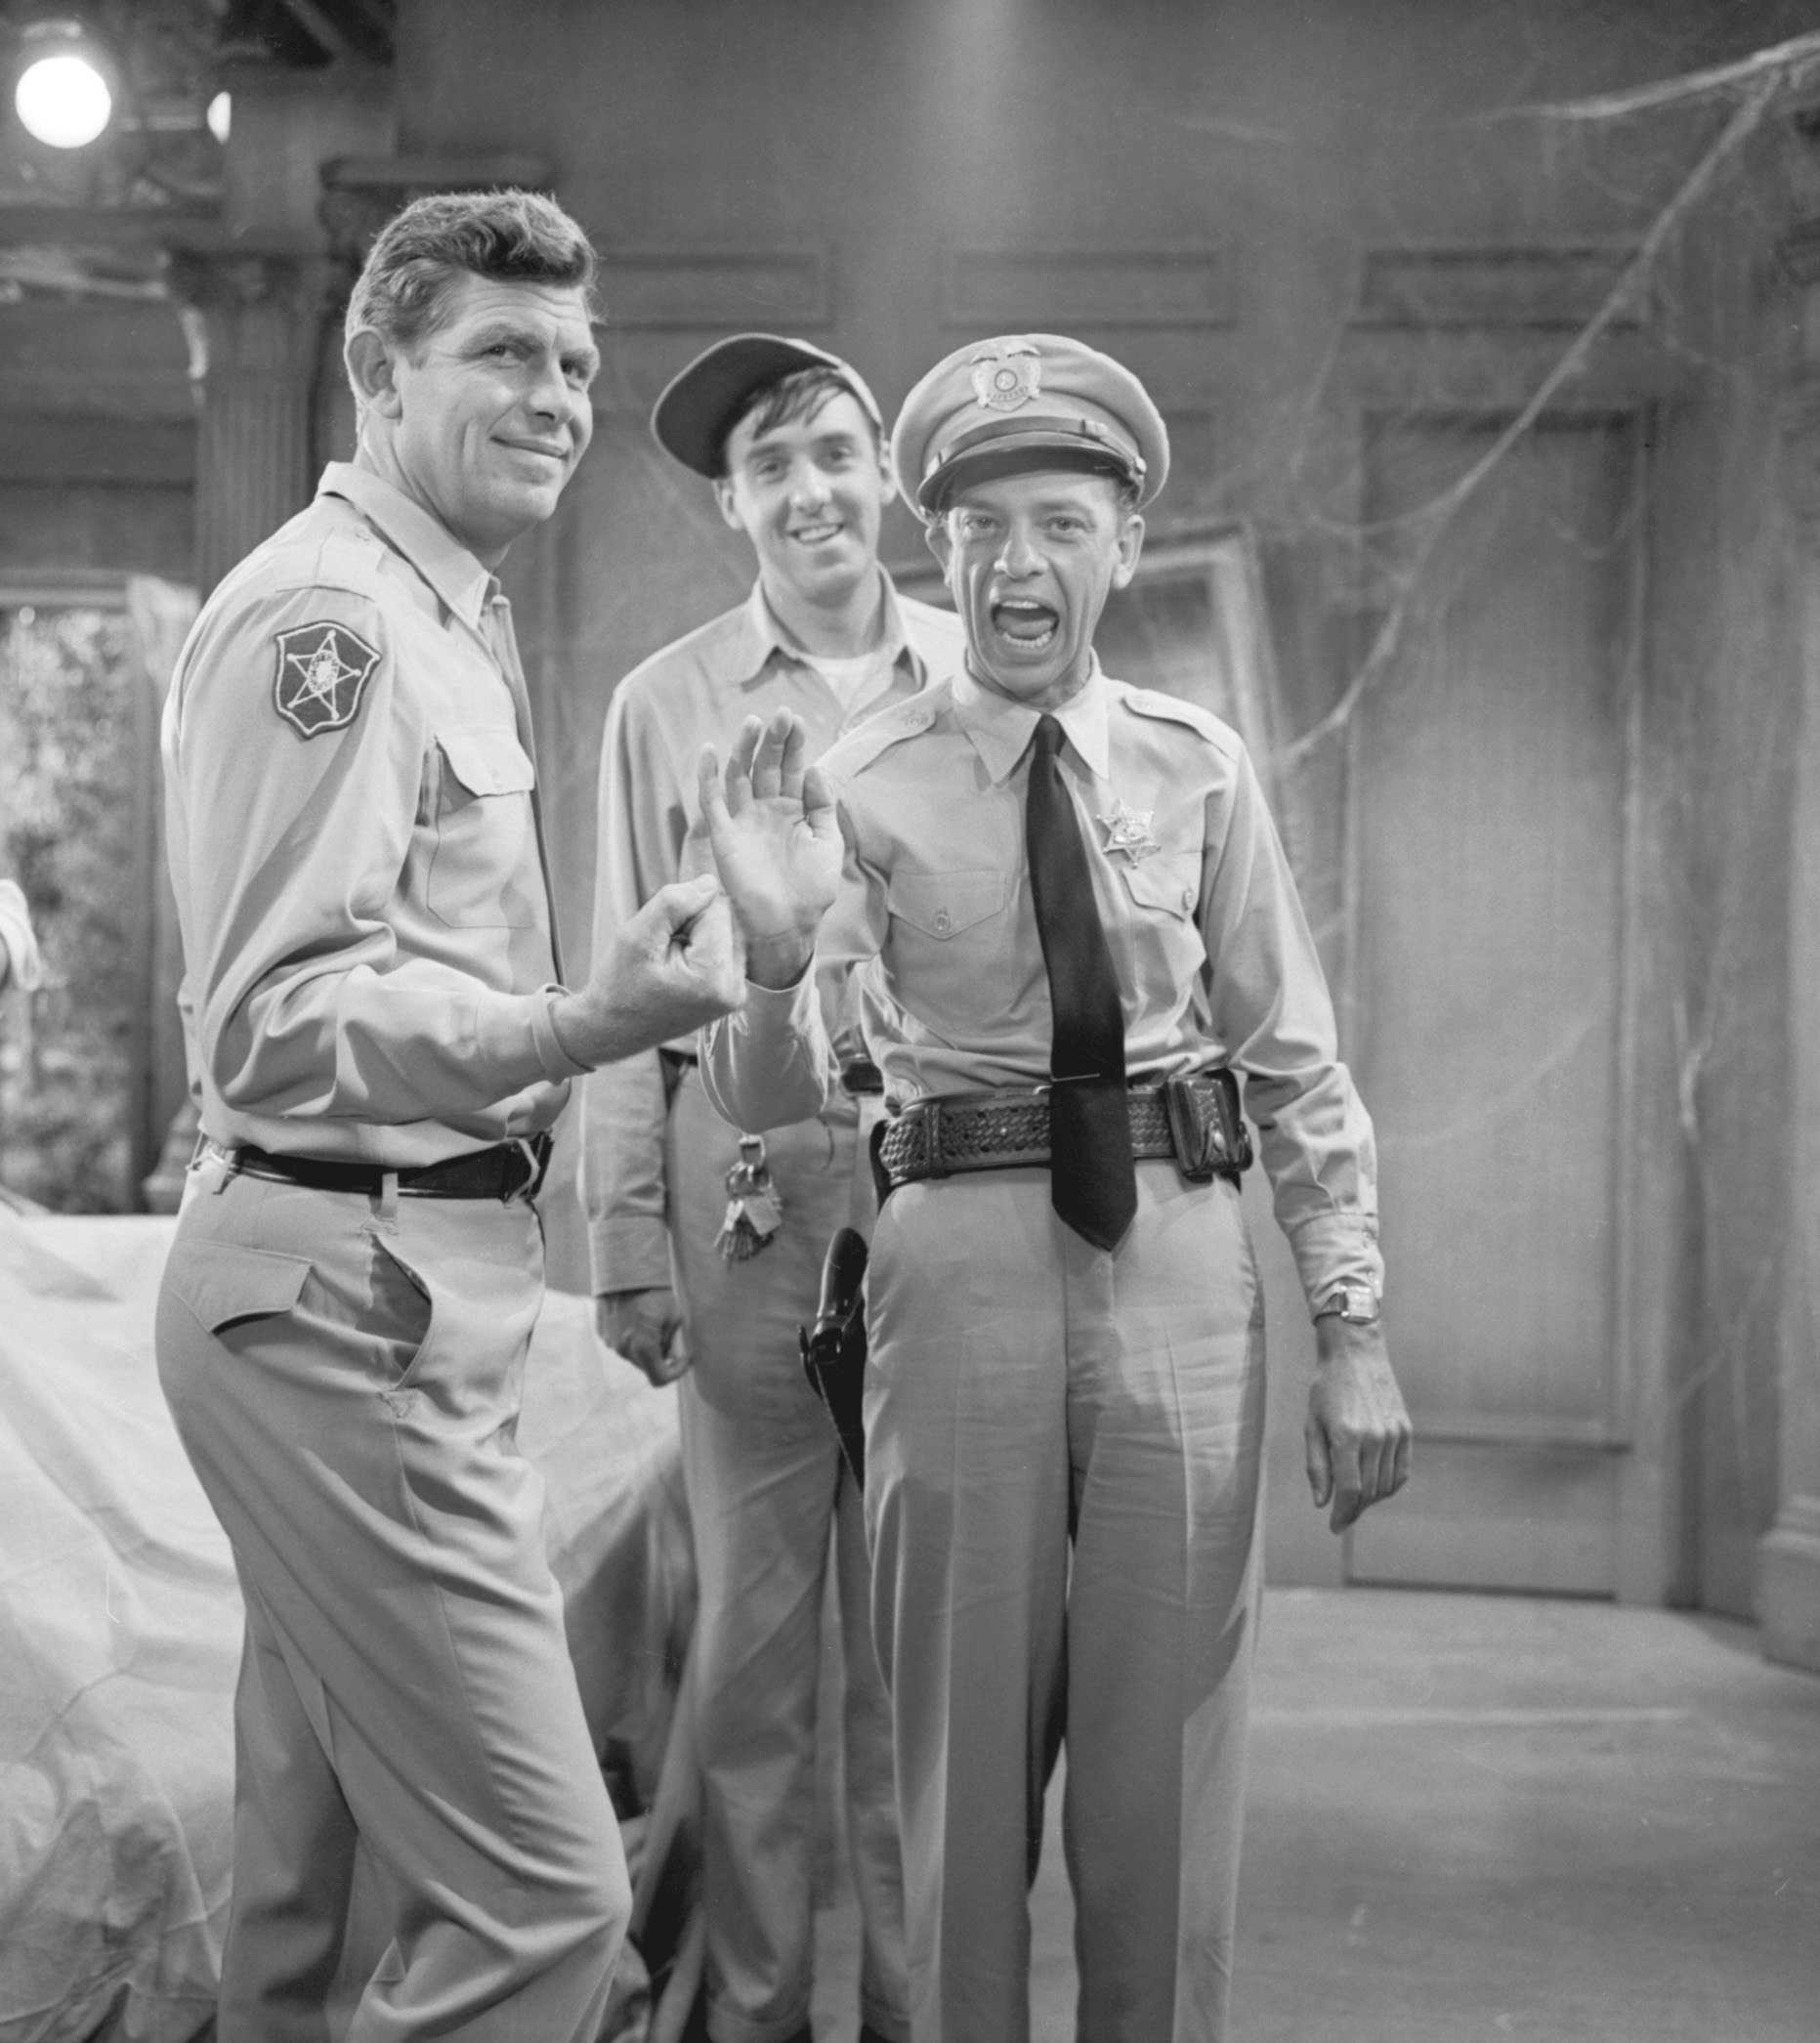 Jim Nabors, center, on the 'Andy Griffith Show' set